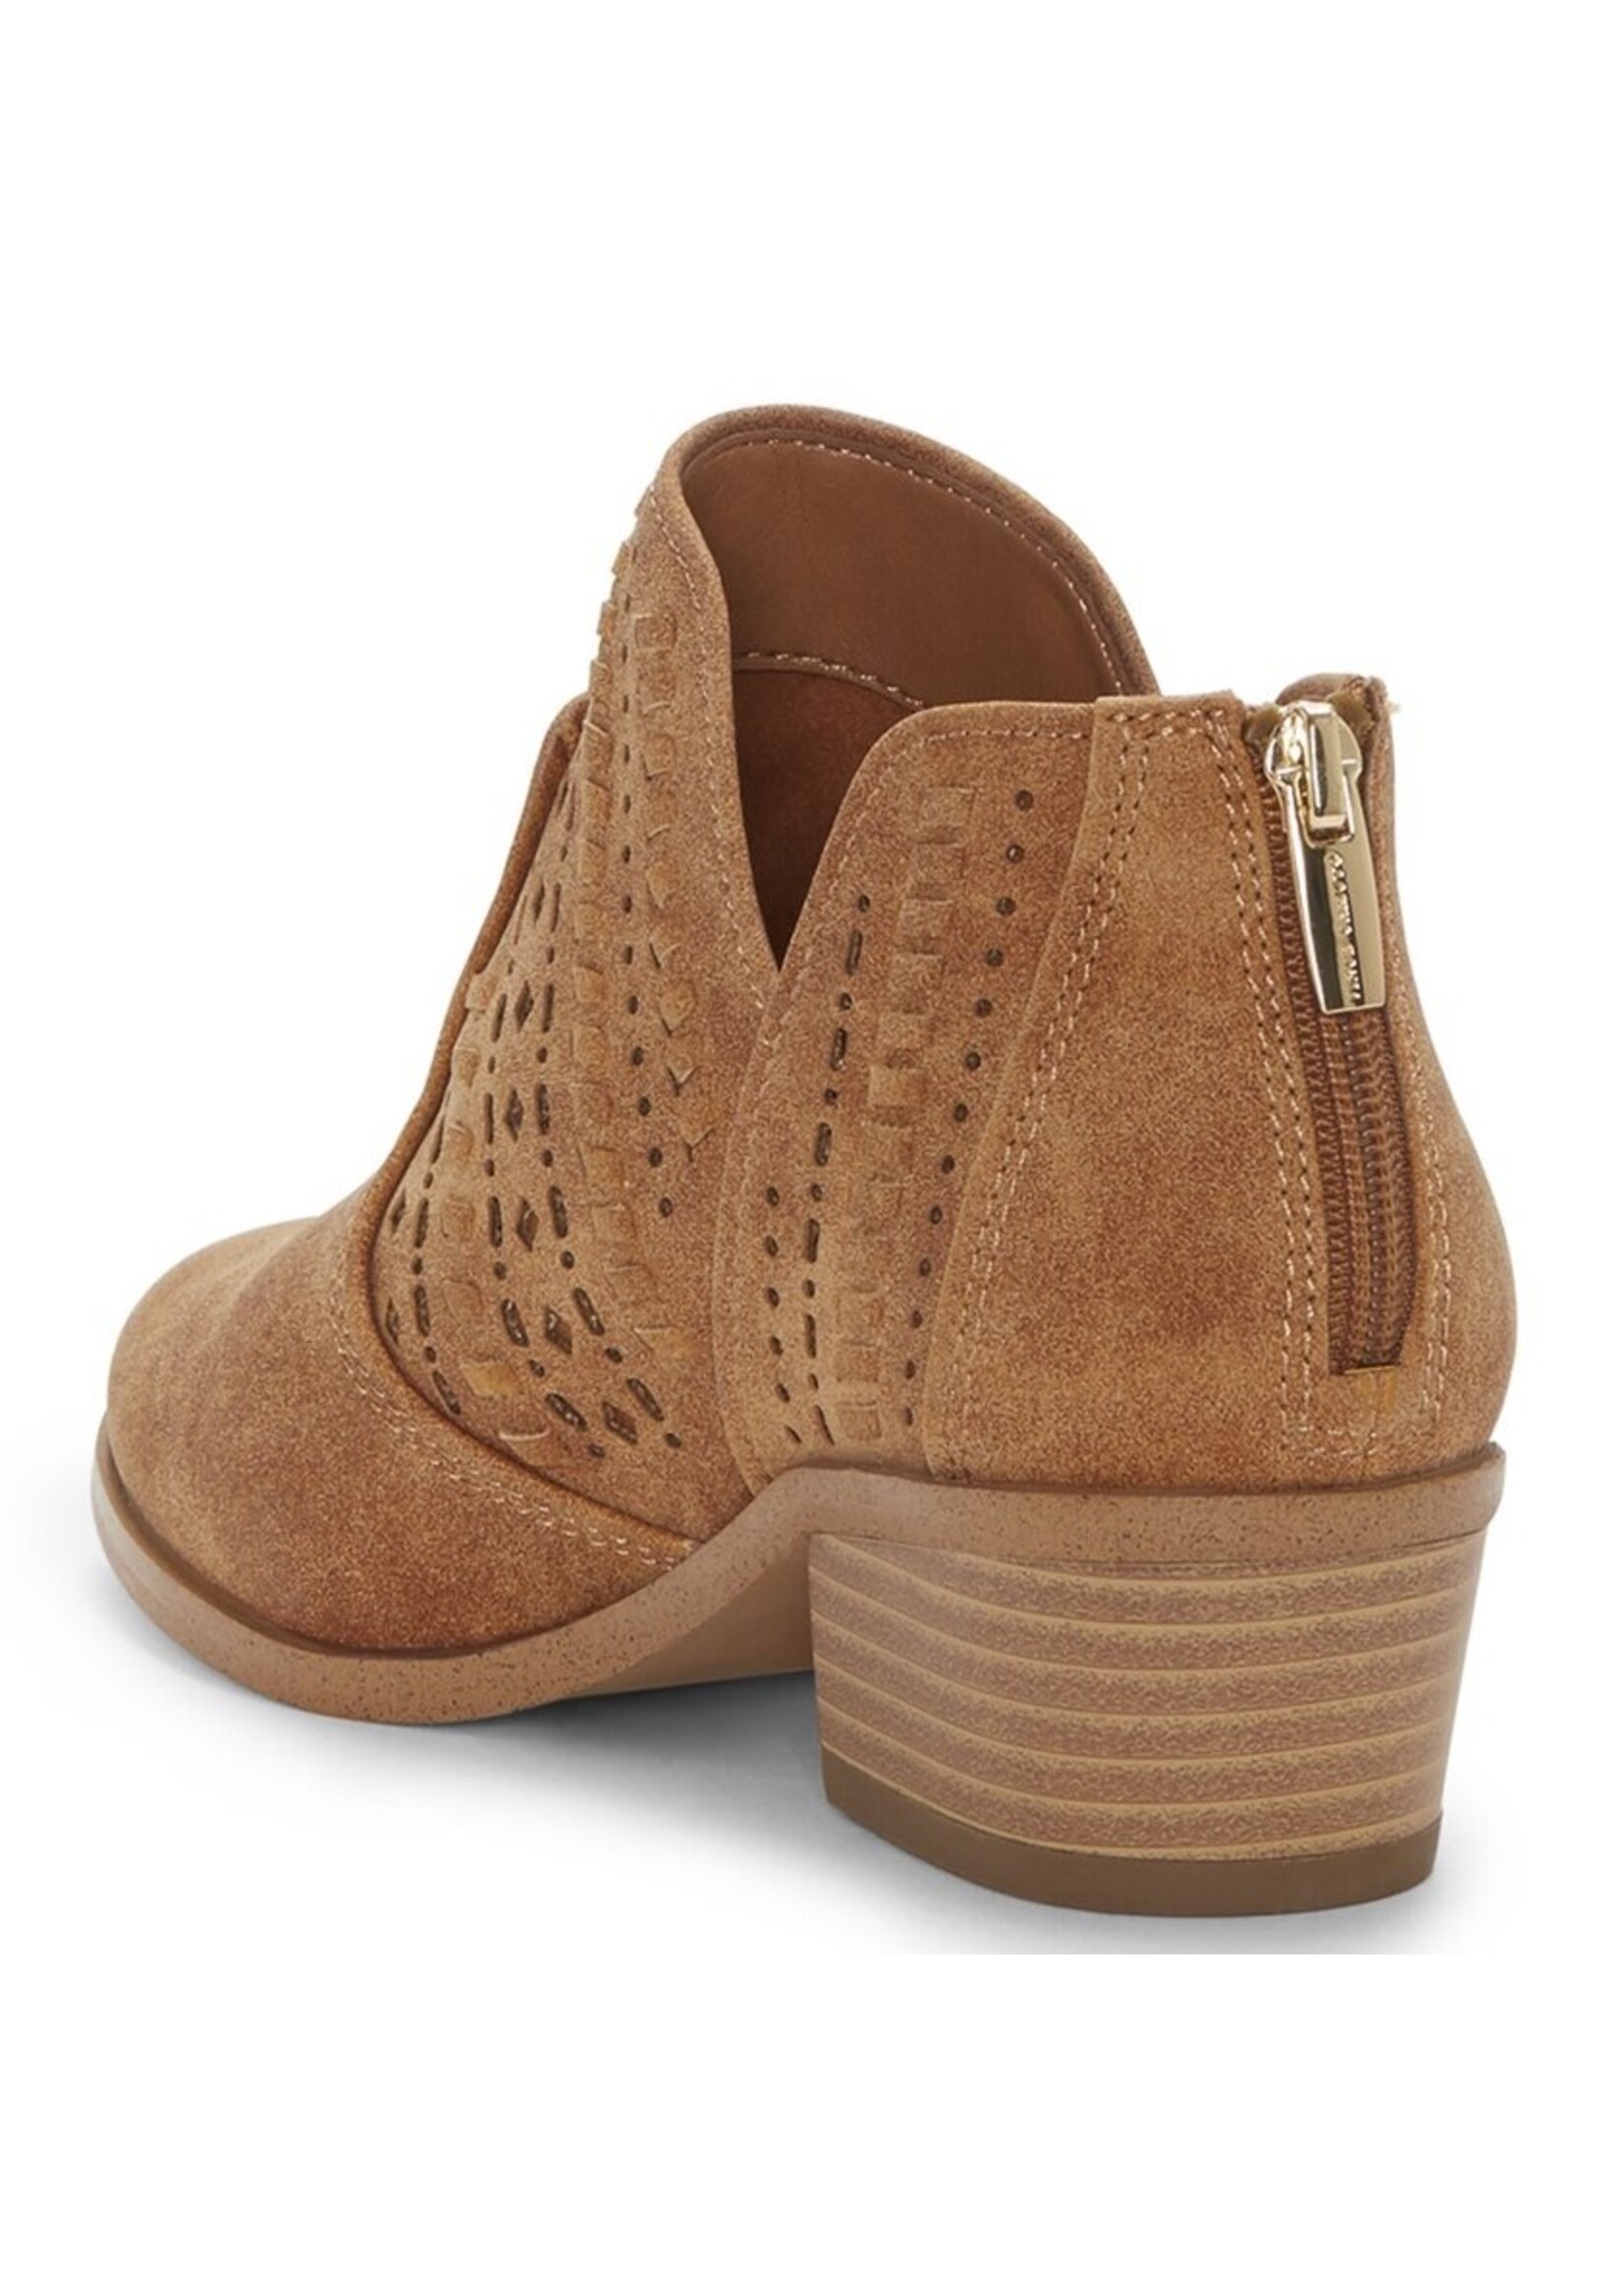 Vince Camuto Vince Camuto Girl's Booties